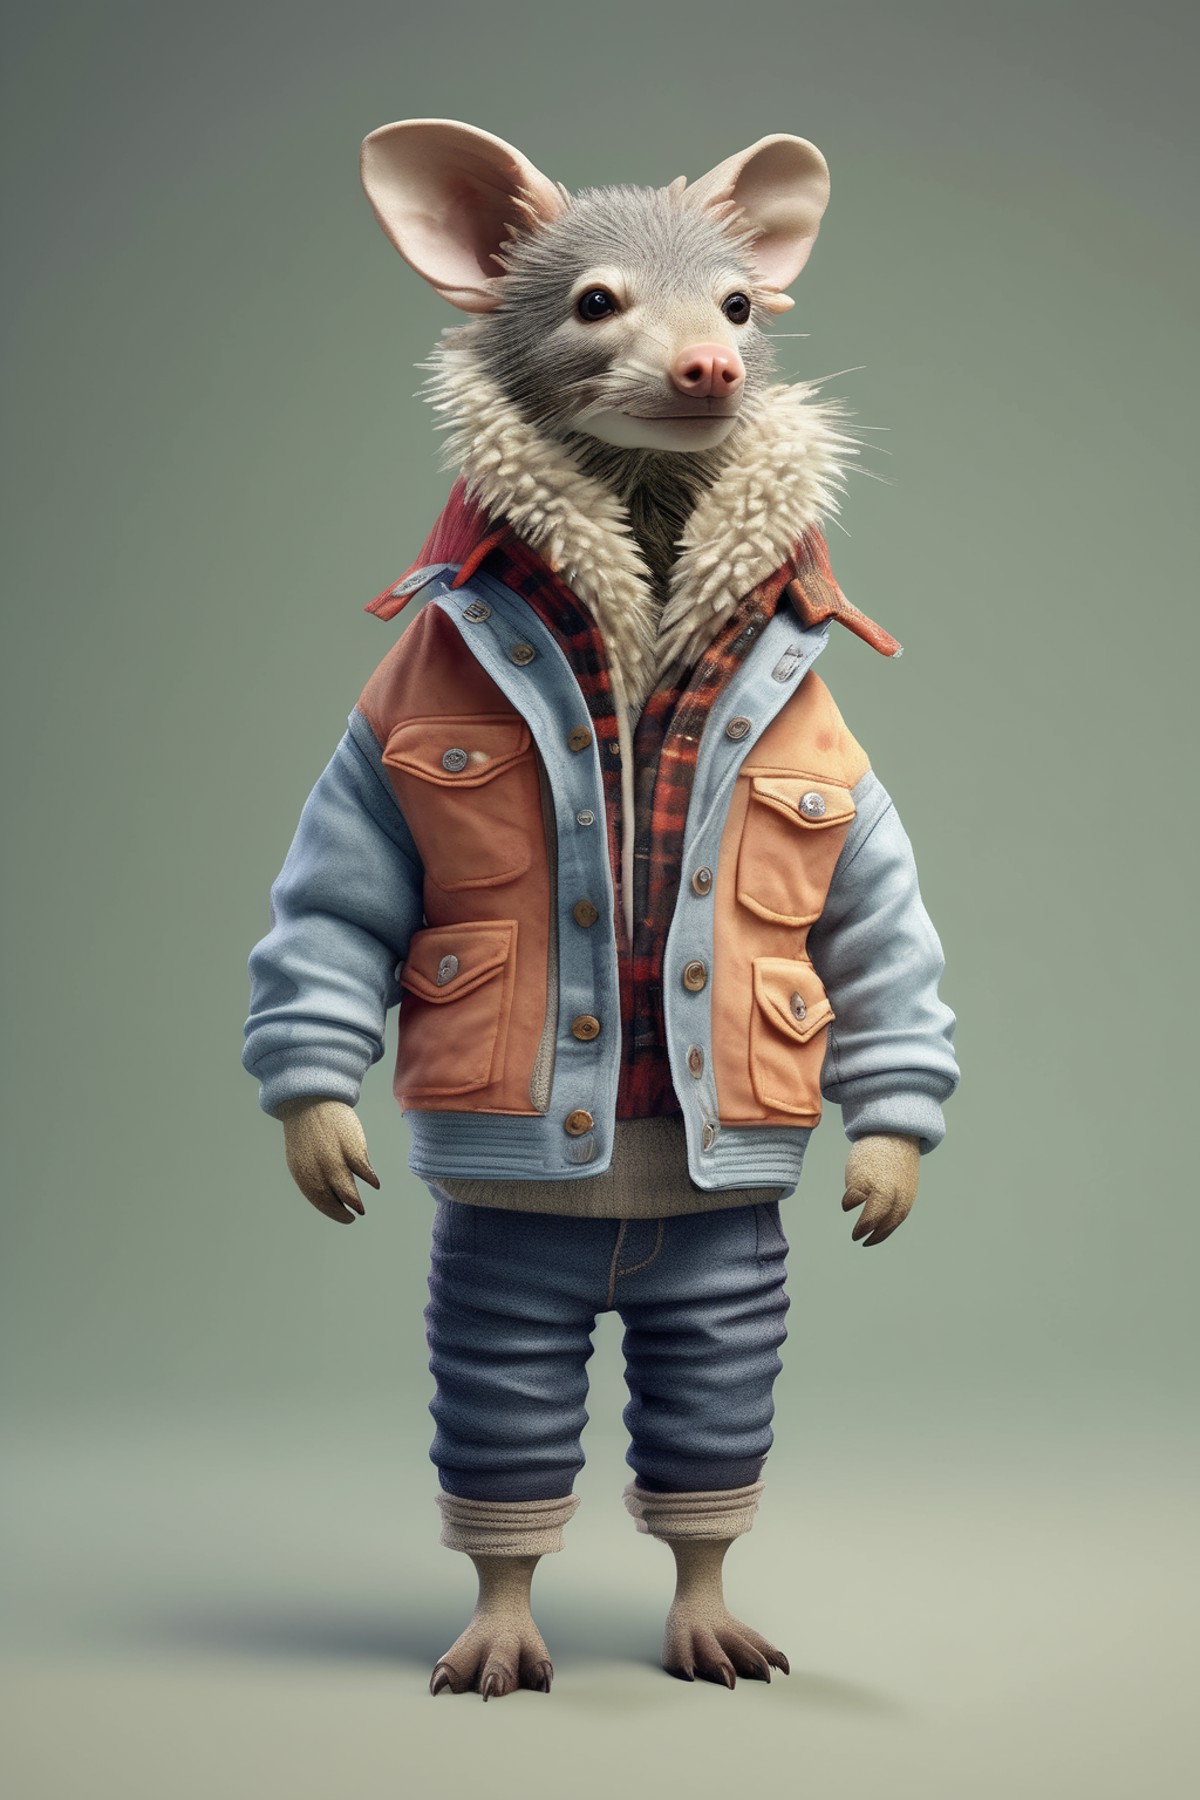 <lora:Dressed animals:1>Dressed animals - a realistic animal wearing clothes